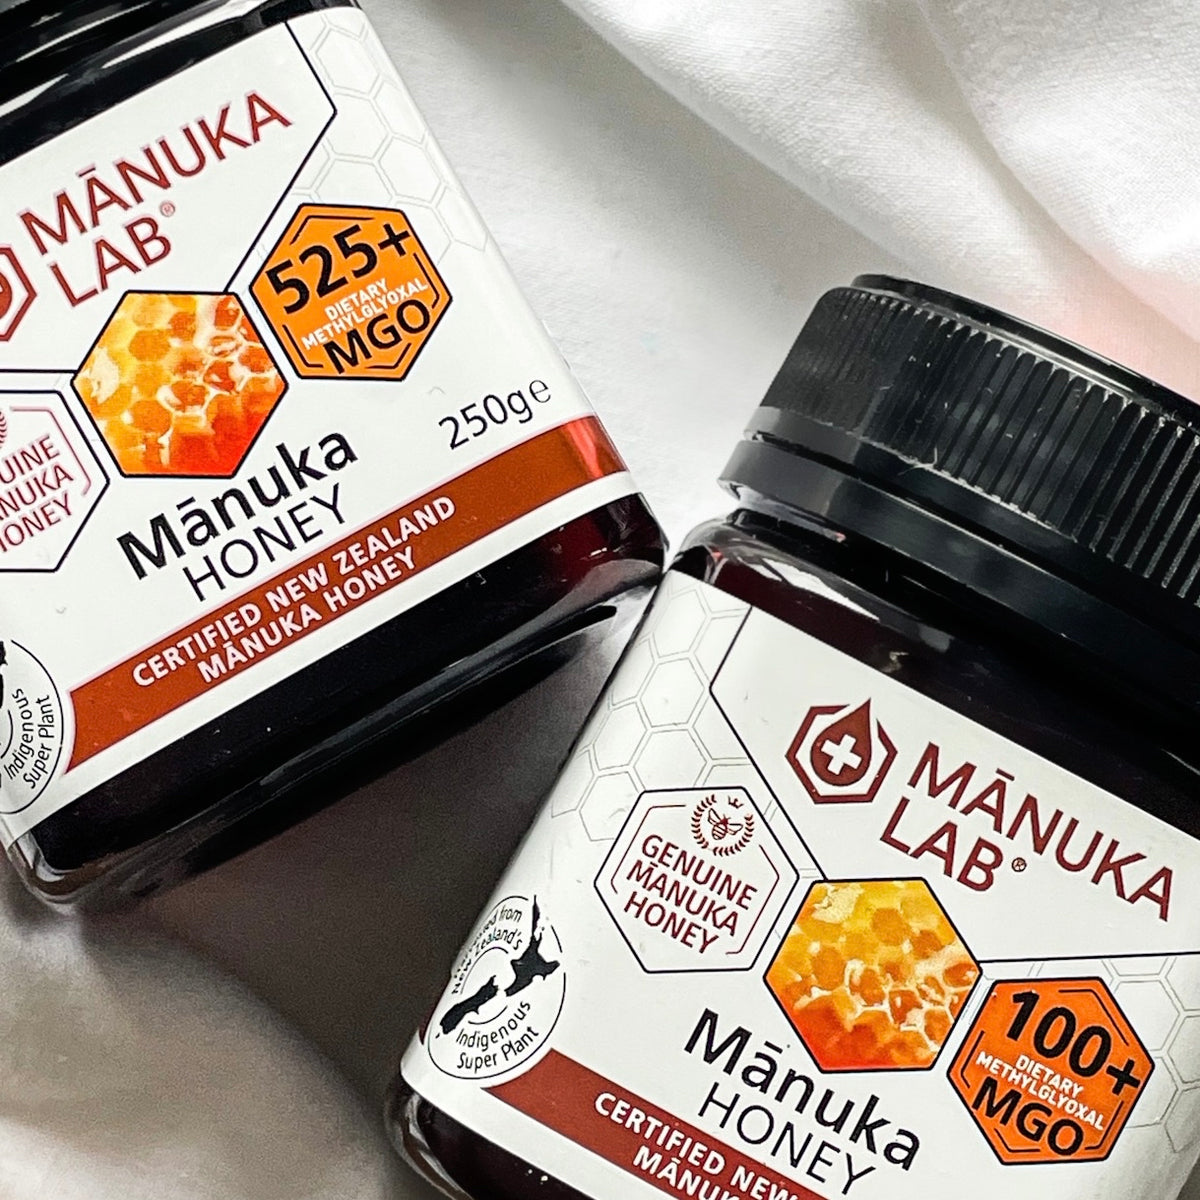 Which is the best Manuka Honey?